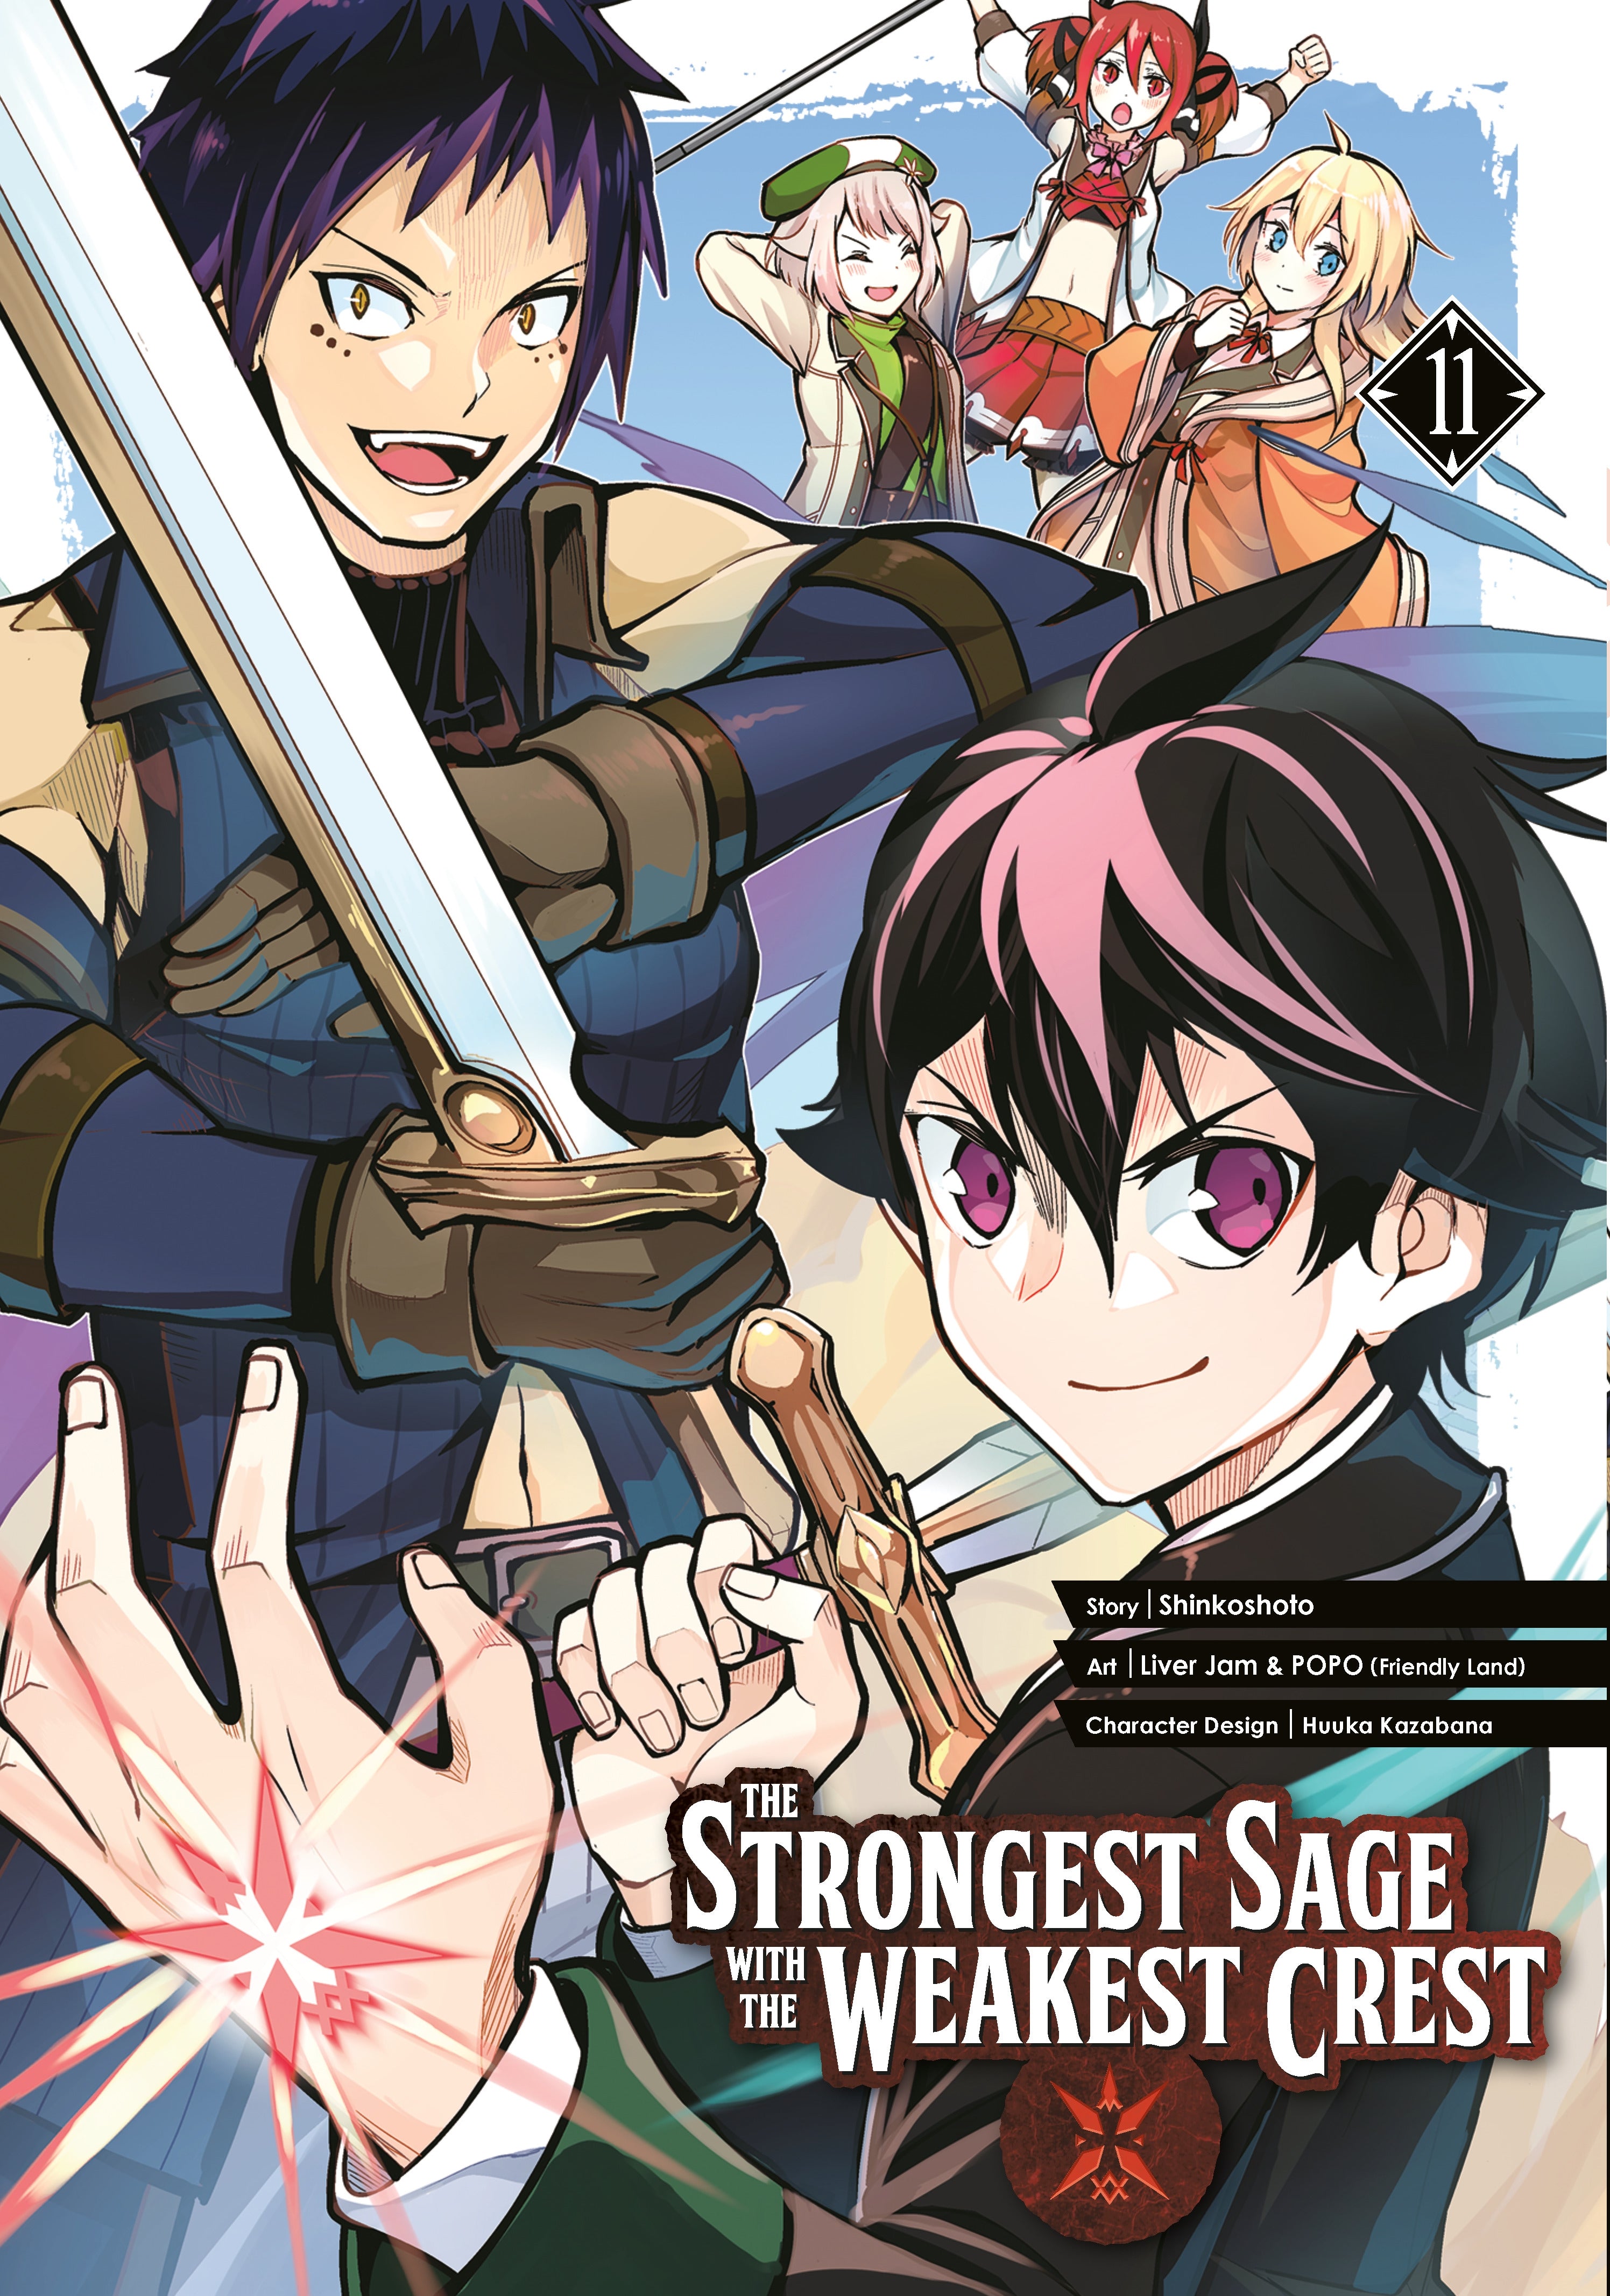 The Strongest Sage with the Weakest Crest - Vol. 11